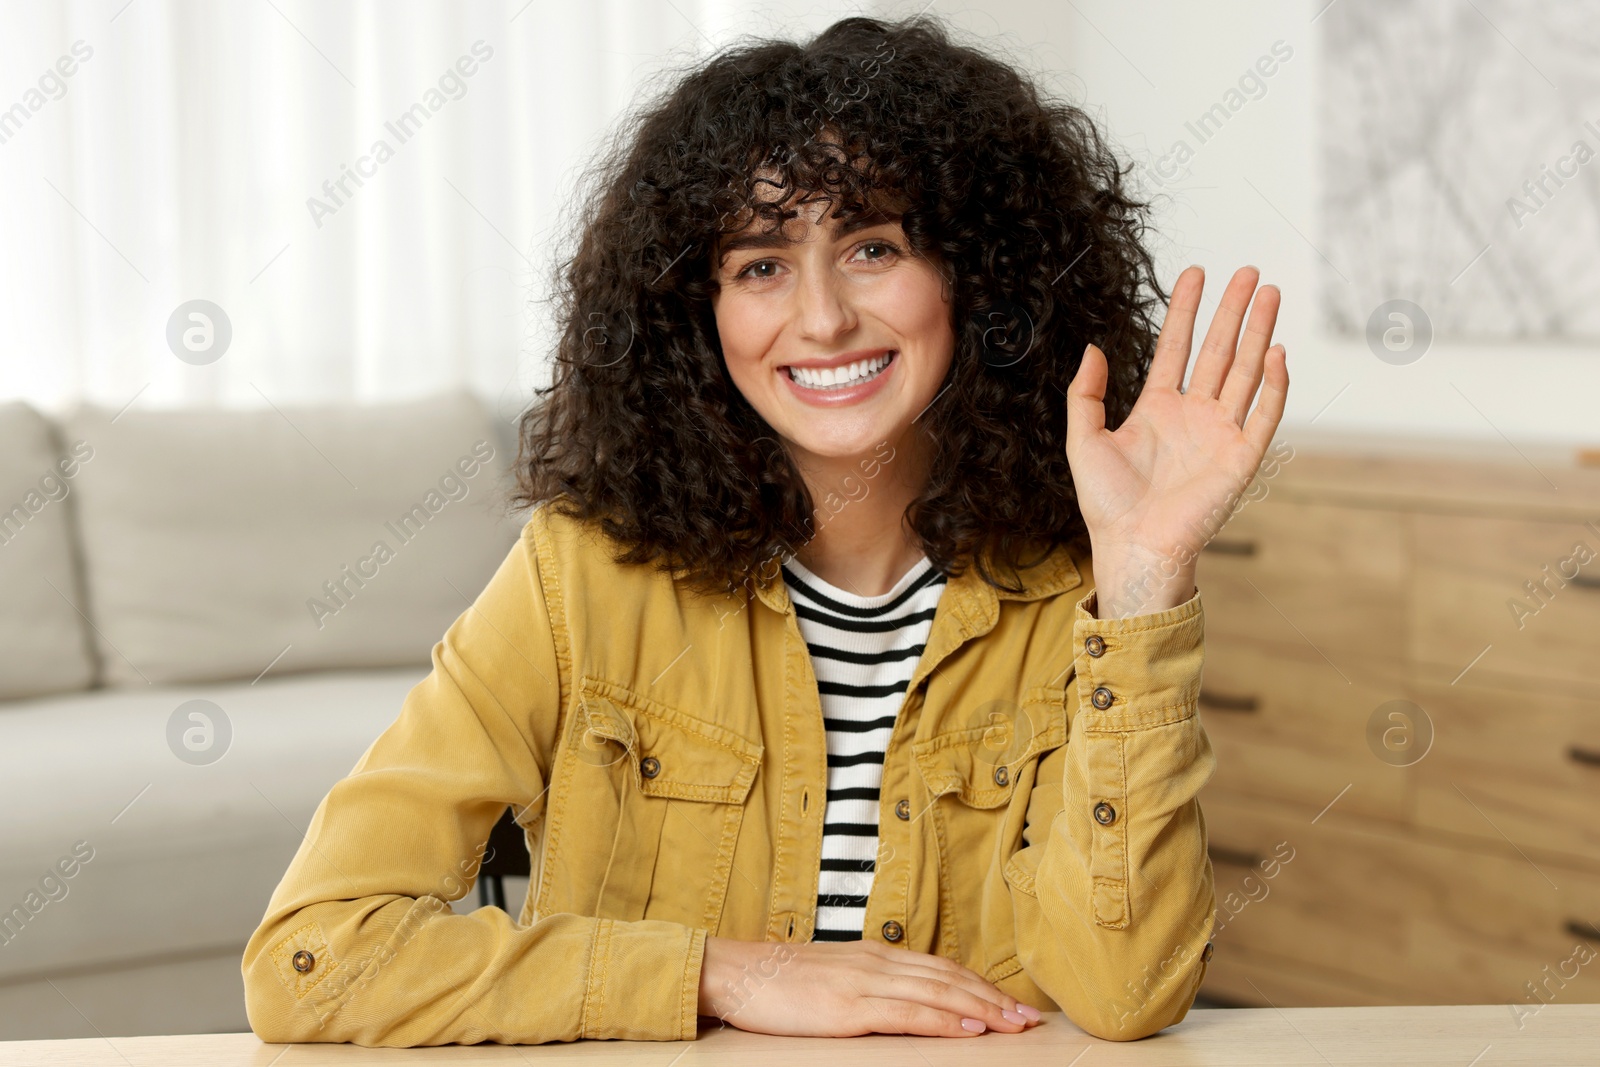 Photo of Happy woman waving hello at wooden table in room